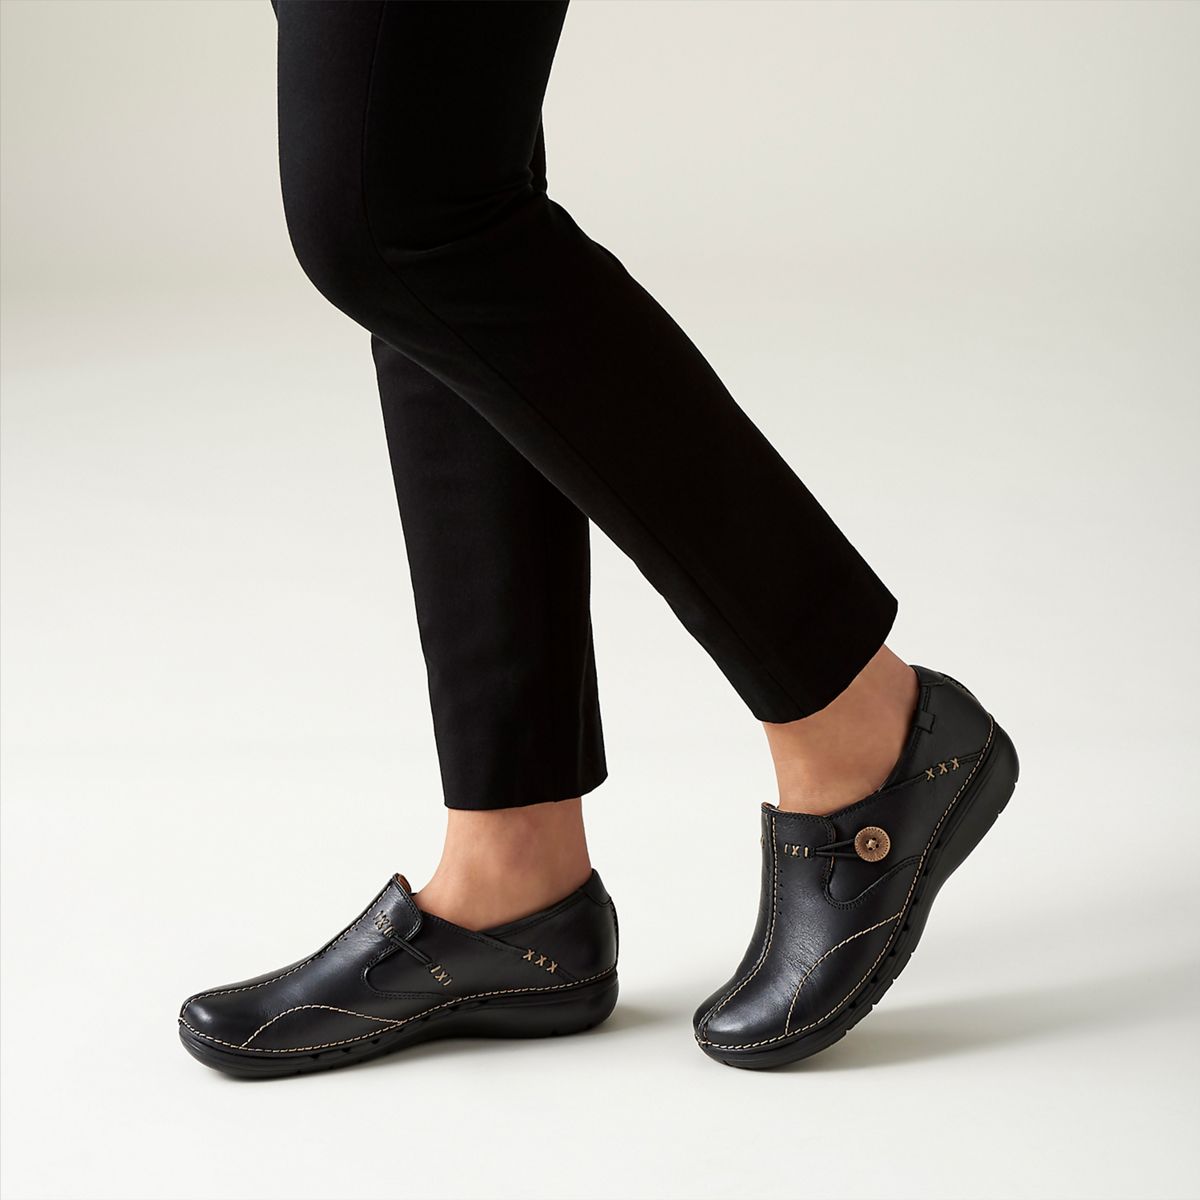  Black - Clarks Canada Official Site | Clarks Shoes